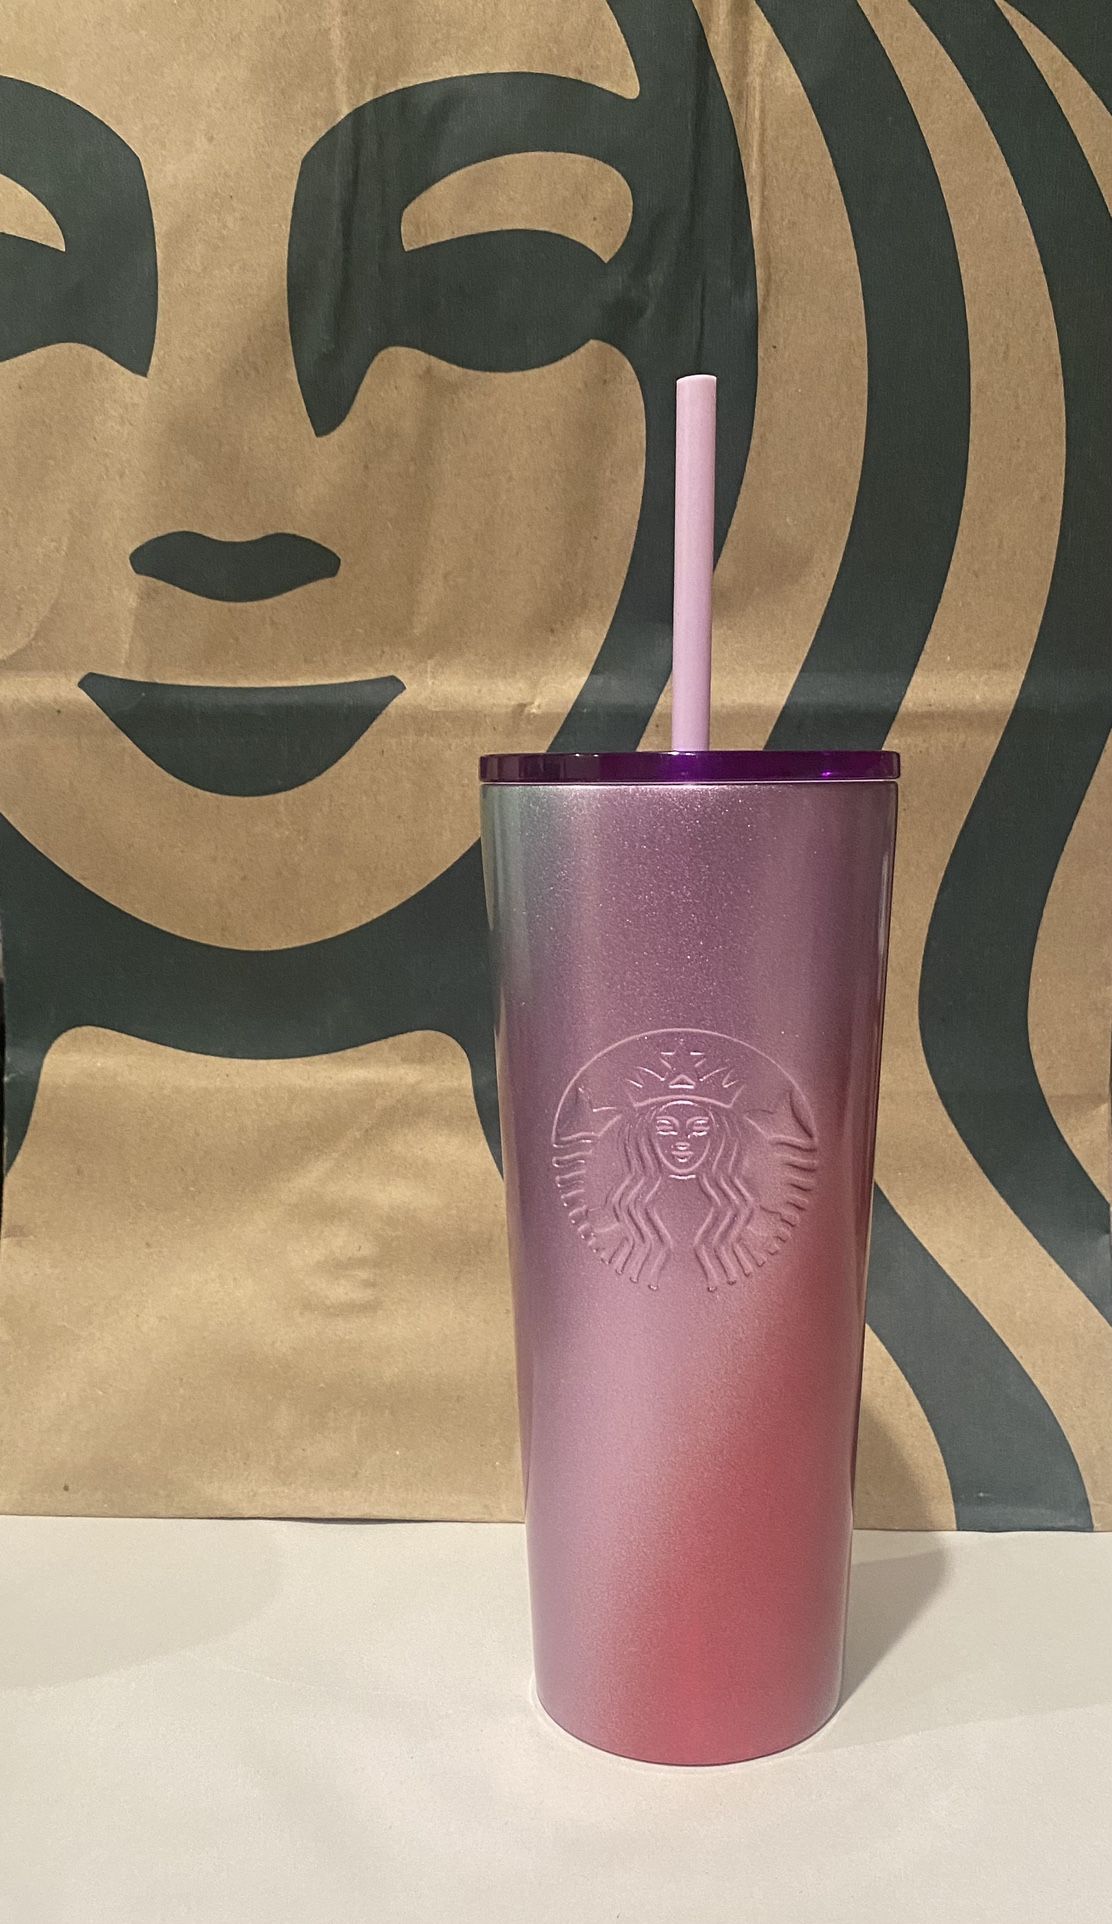 starbucks stainless steel cold cup